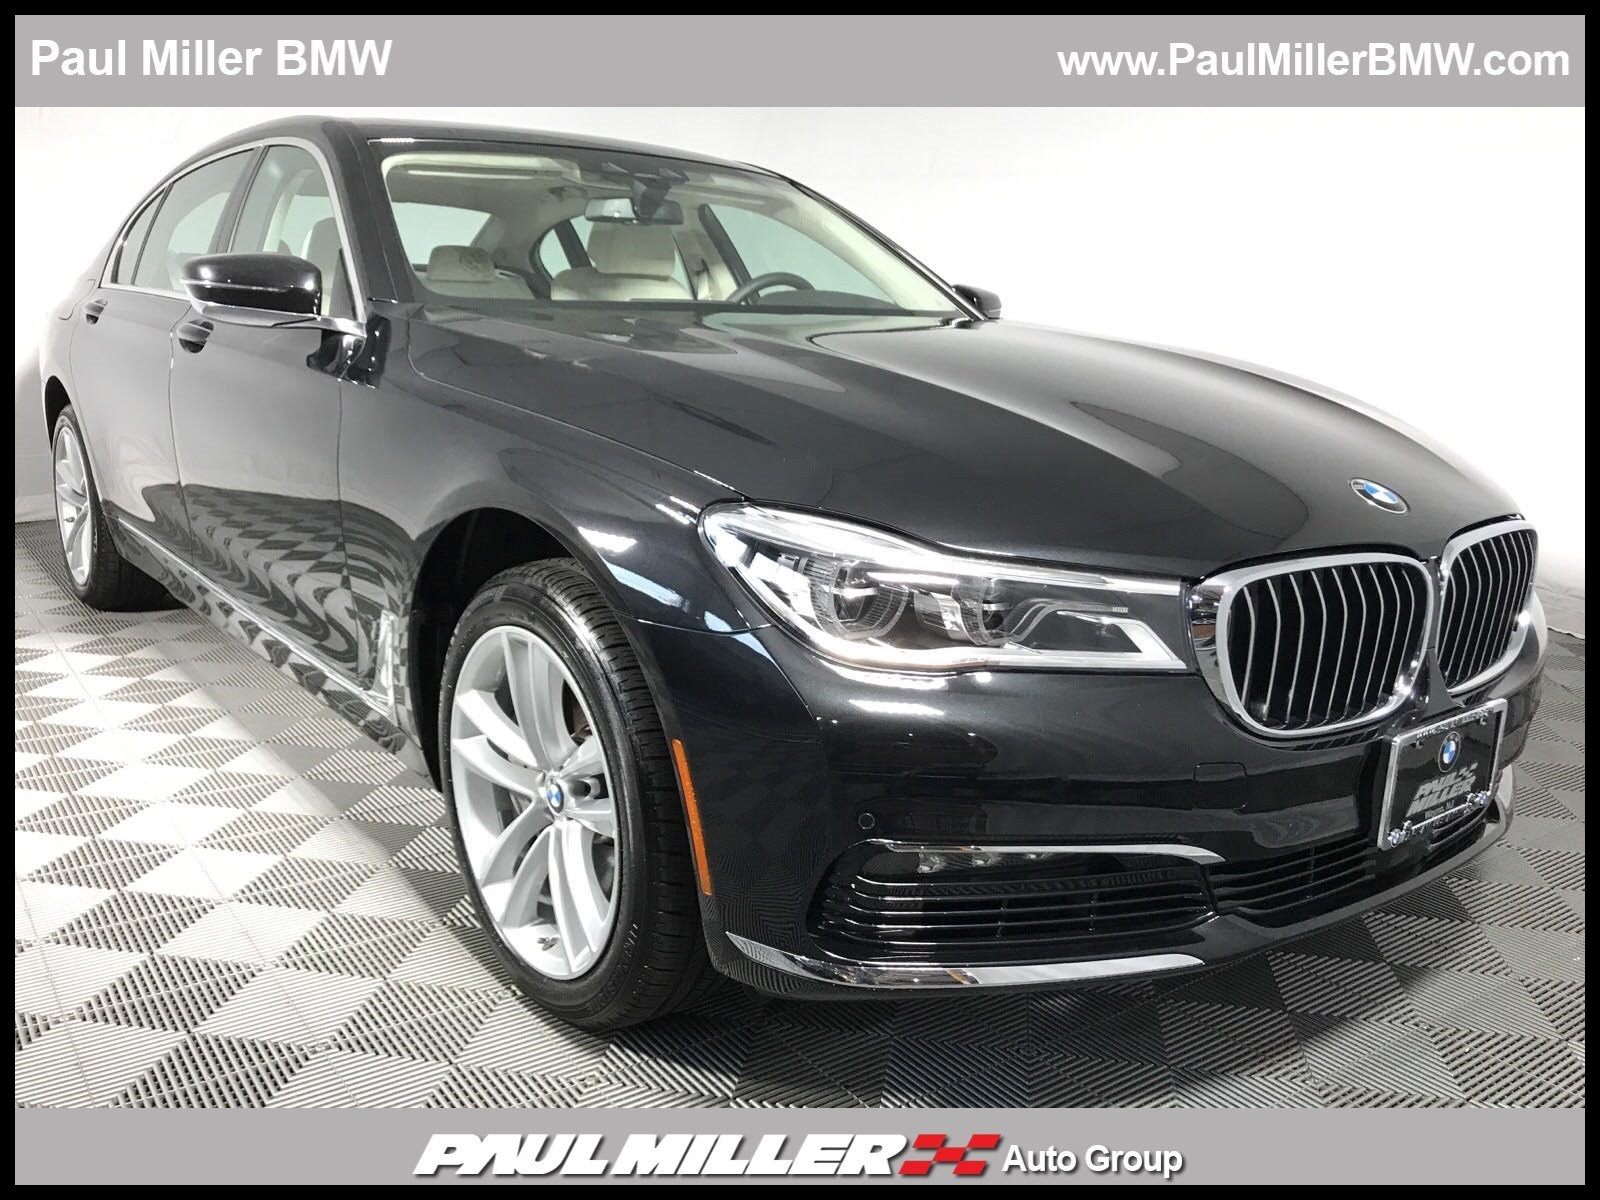 Paul Miller Bmw New Jersey Unique Certified Pre Owned 2018 Bmw 7 Series 4dr Car In